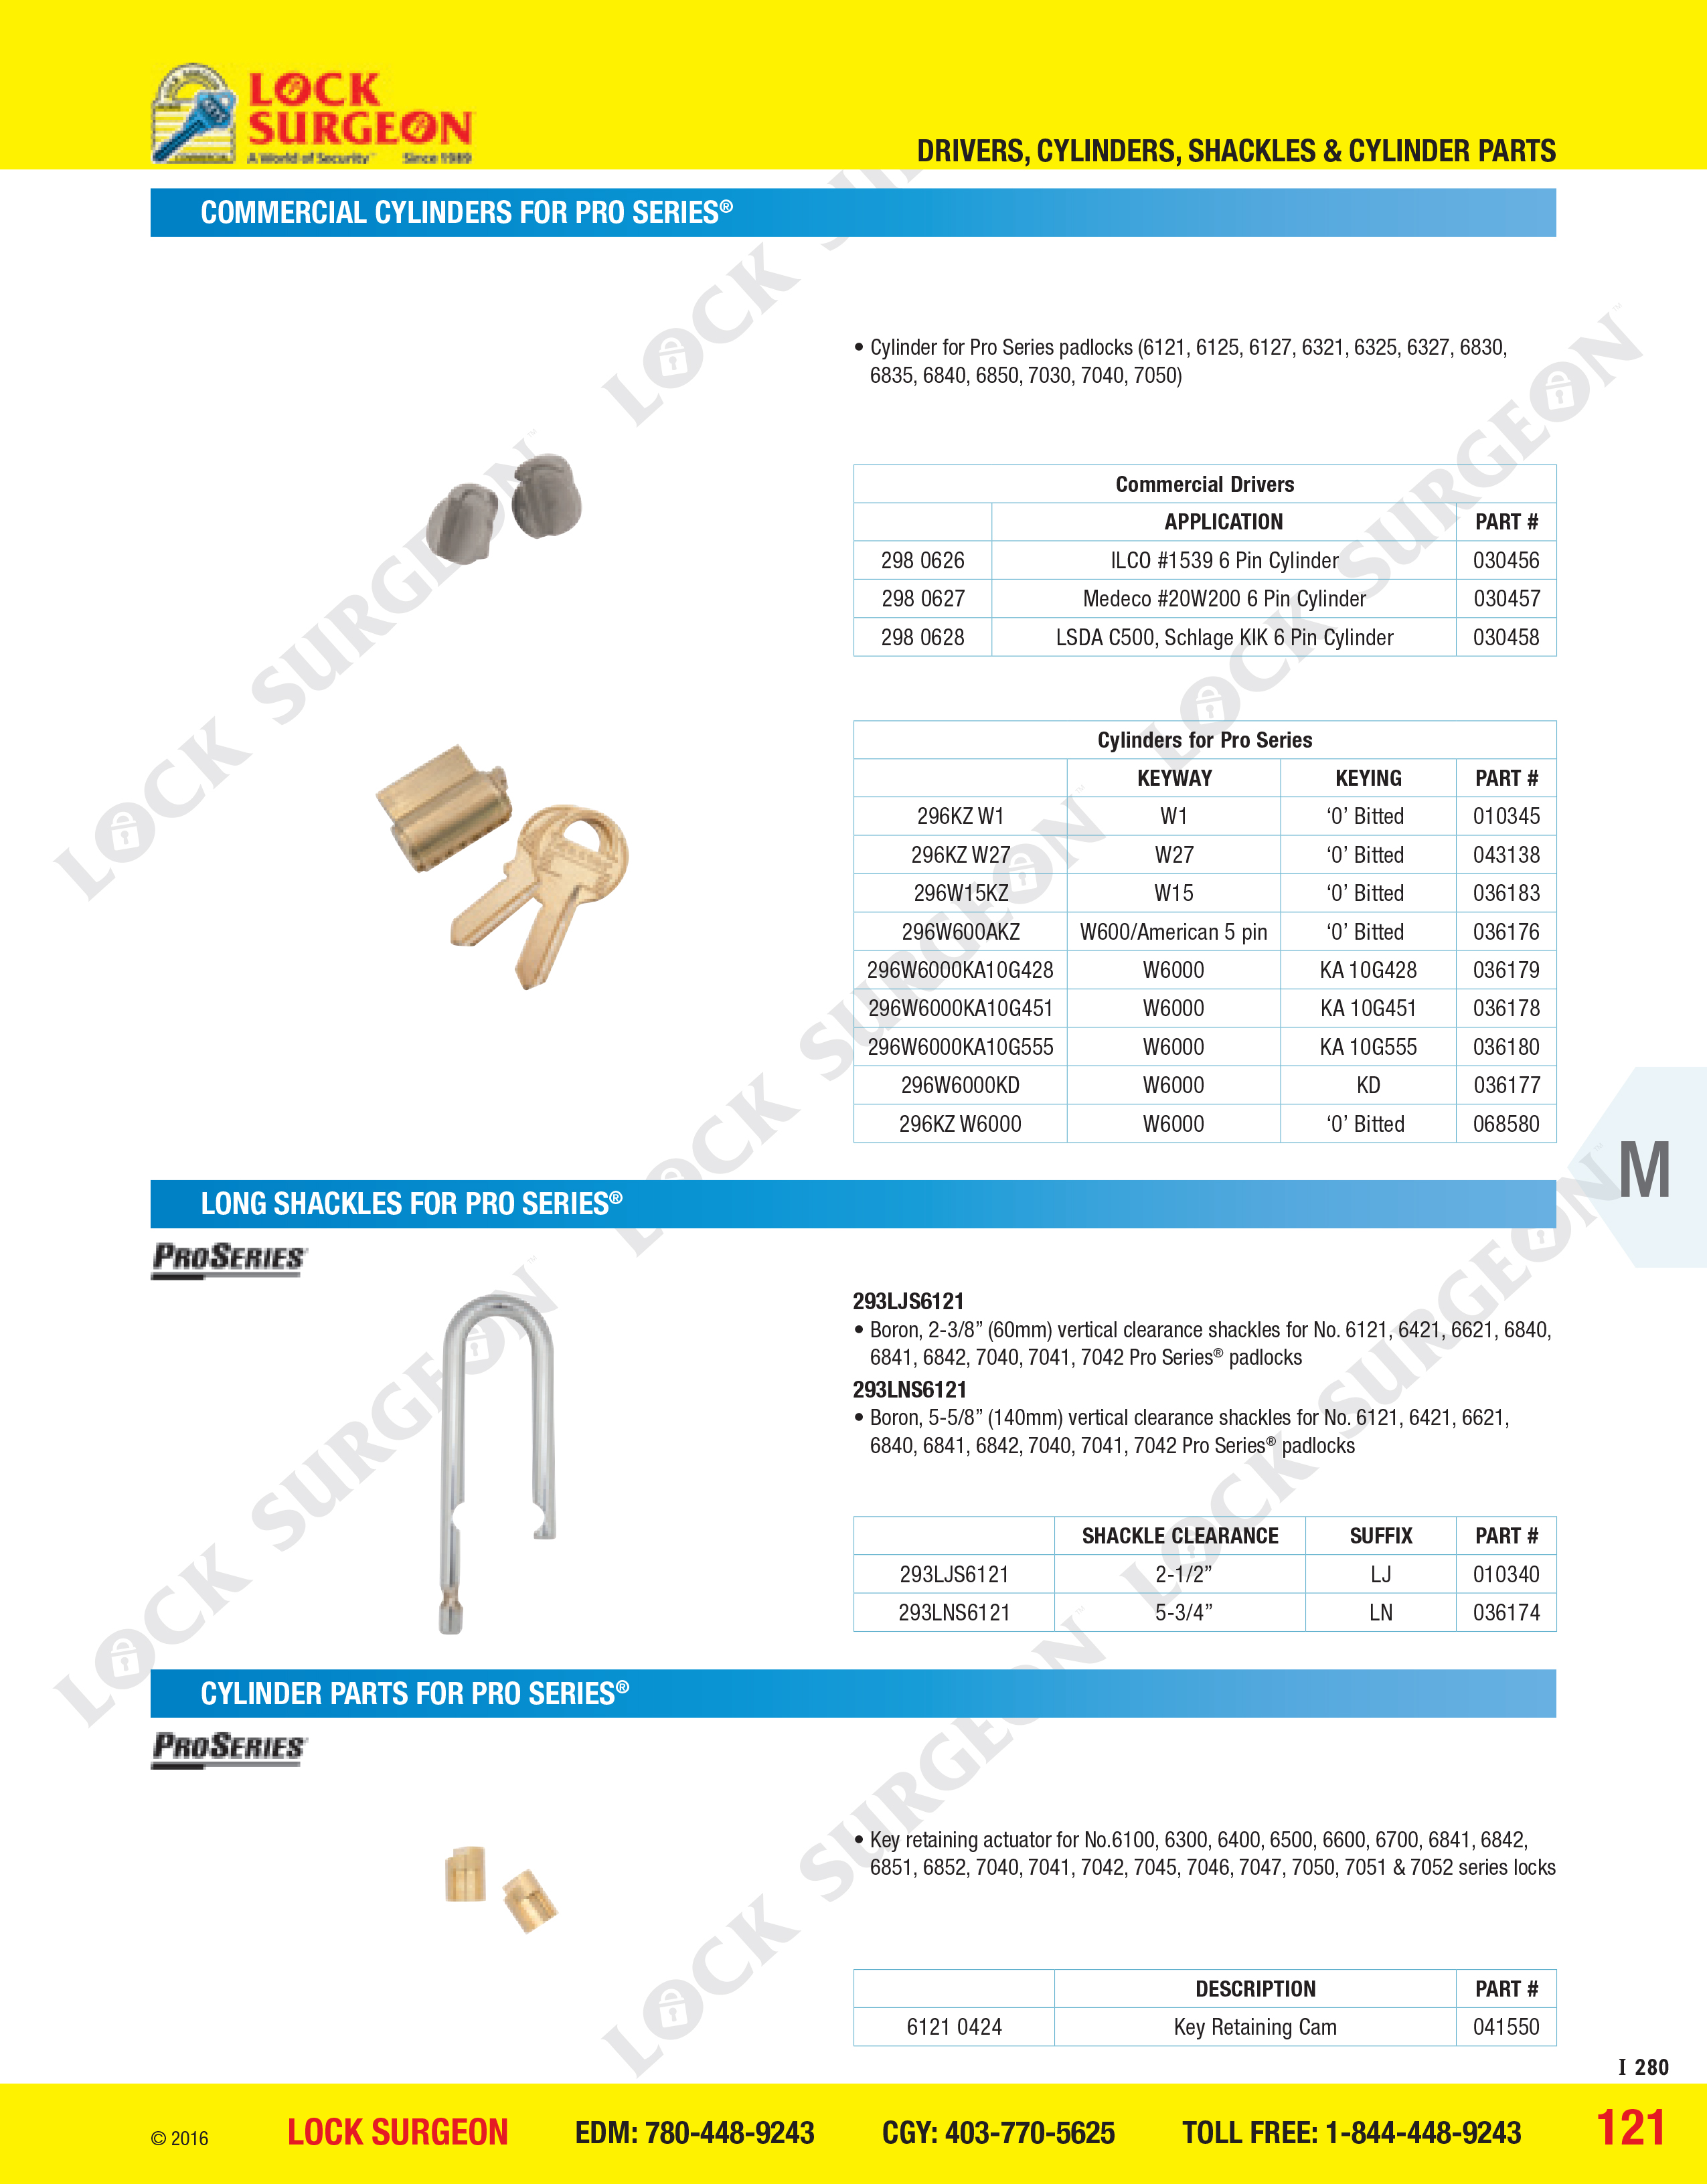 Commercial cylinders for Pro Series, long shackles for Pro Series, Cylinder parts for Pro Series®